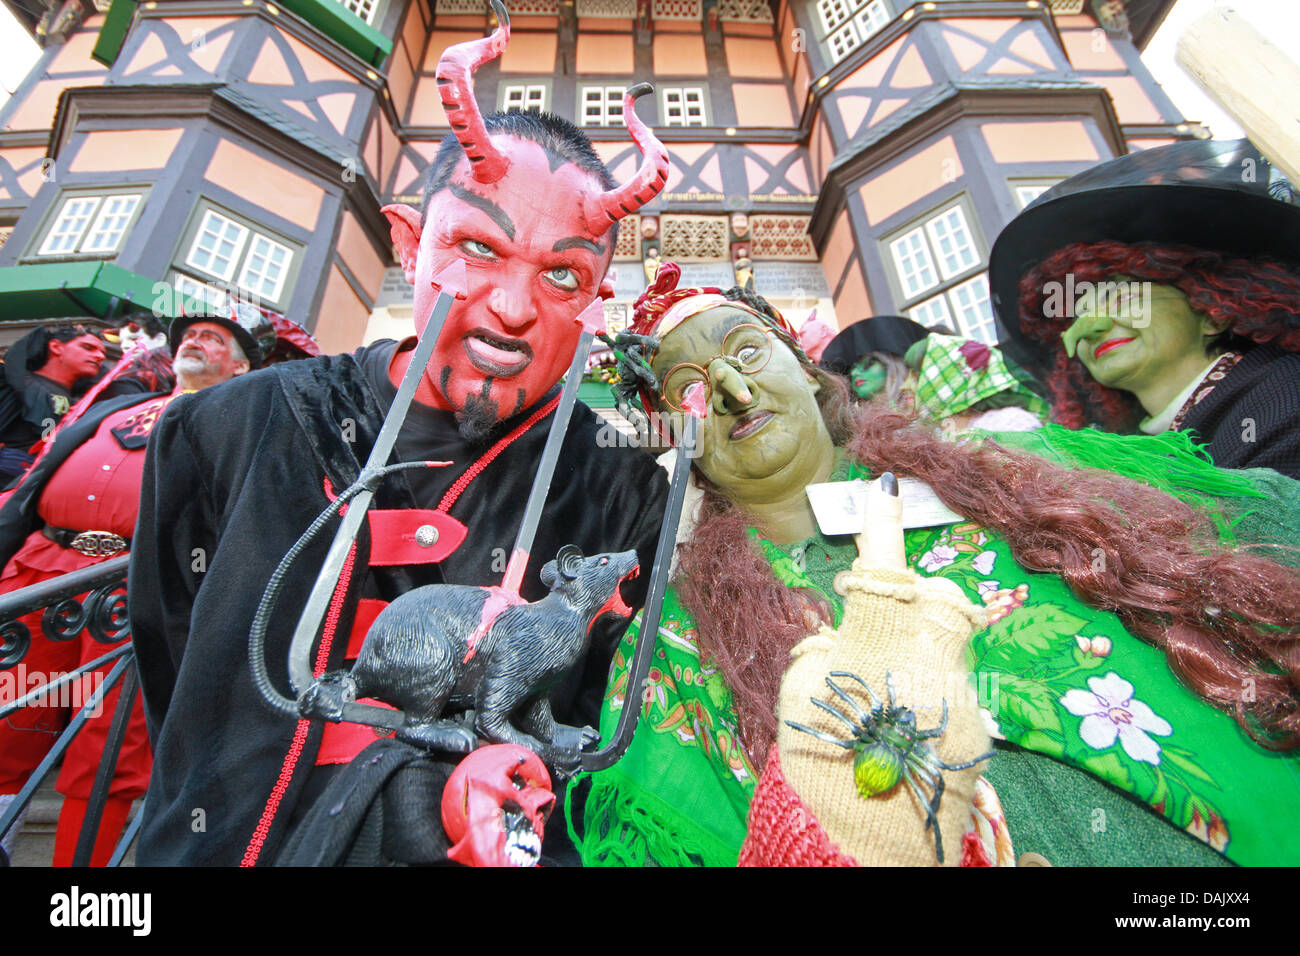 Participants dressed in witch and devil costumes celebrate the Walpurgis festival in Wernigerode, Germany, 20 April 2011. The night of 30 April is famous worldwide, because of Johann Wolfgang Goethe's classic 'Faust', where he describes how witches ride around brooms or billy goats to have orgies with the devil. Photo: Matthias Bein Stock Photo